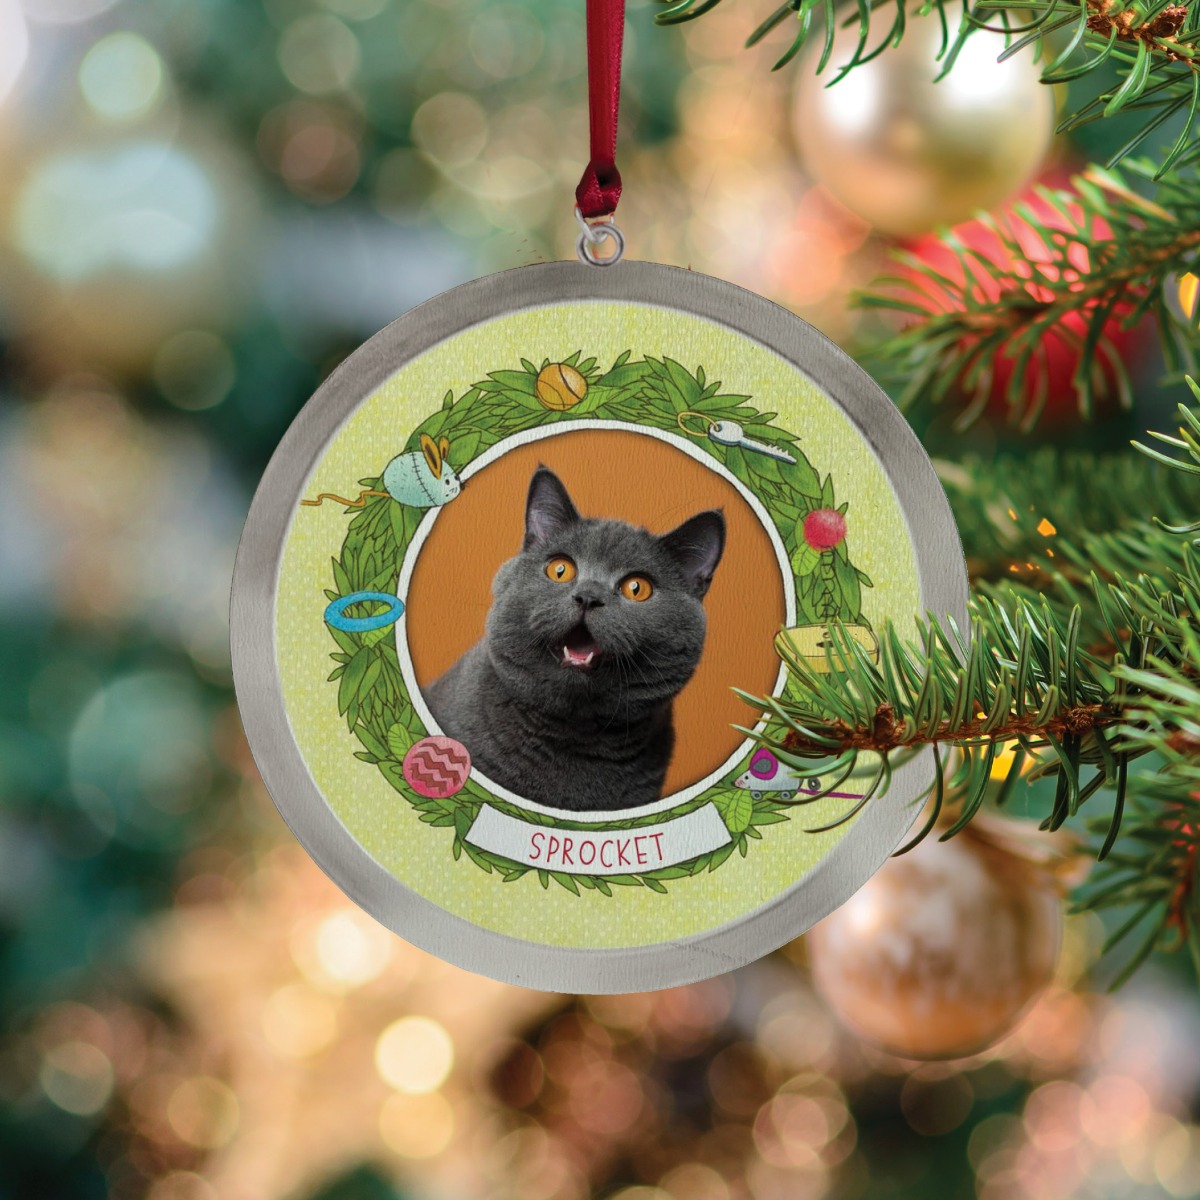 If My Cat Could Talk Personalized Book and Ornament Gift Set